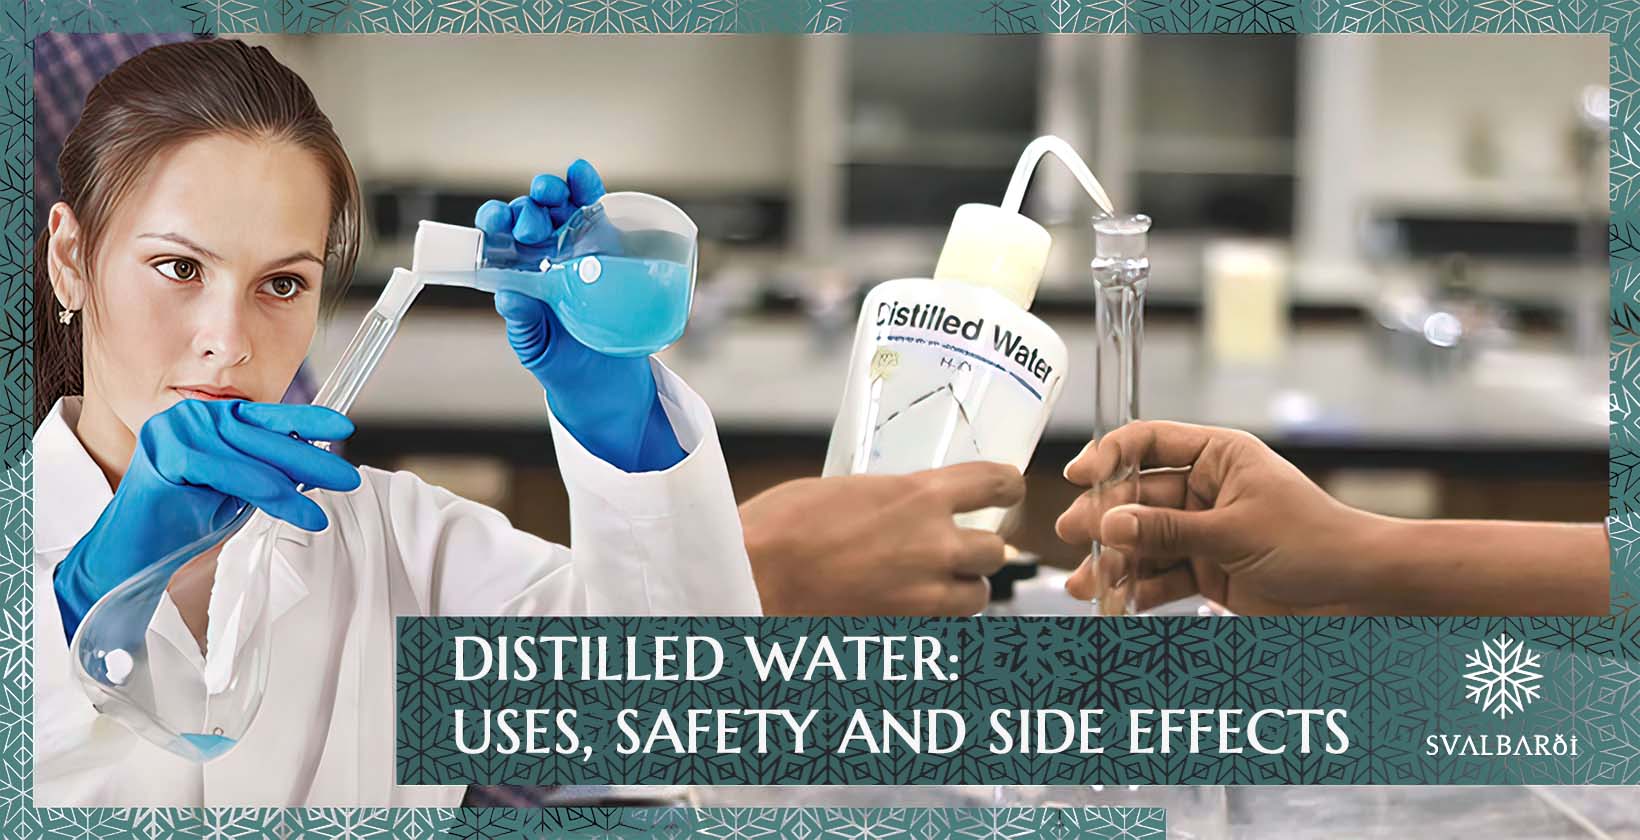 Deionized Water Vs Distilled Water - Knowing The Difference